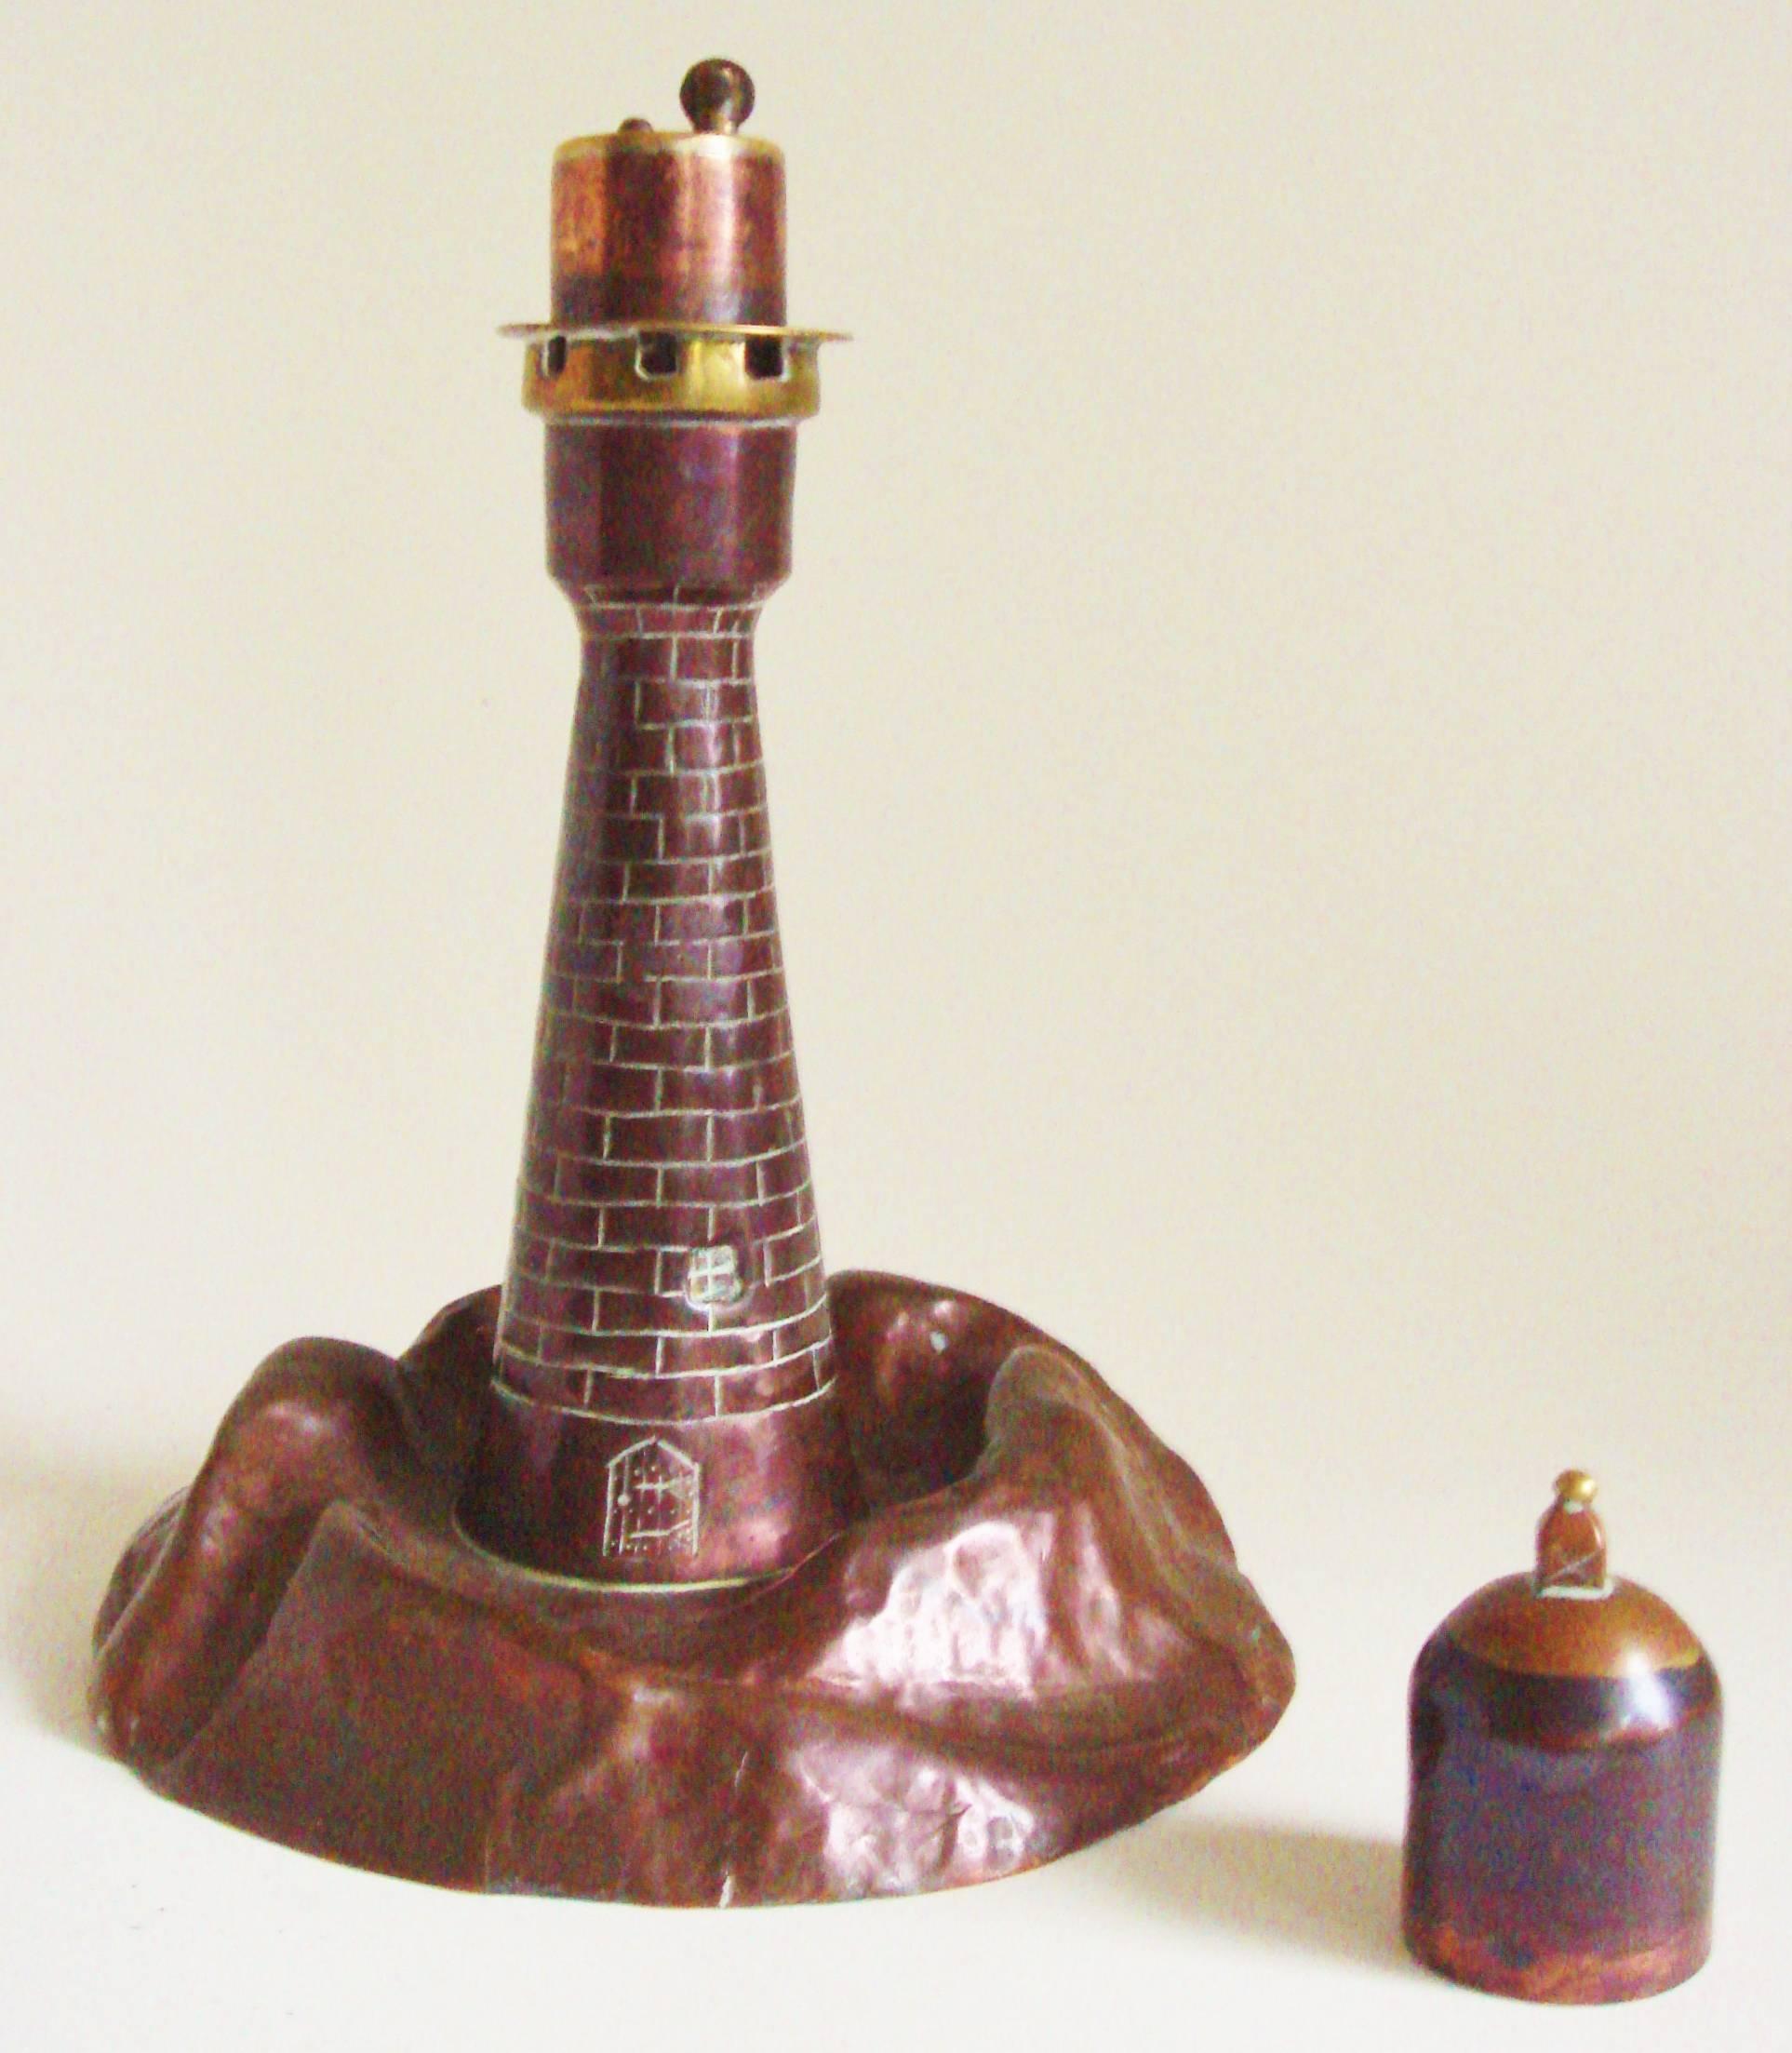 This Trench Art figurative wheel and flint table lighter is beautifully modeled in the form of a brick lighthouse standing on a rocky outcrop all in solid bronze. The door, bricks and window details have been primitively incised into the bronze